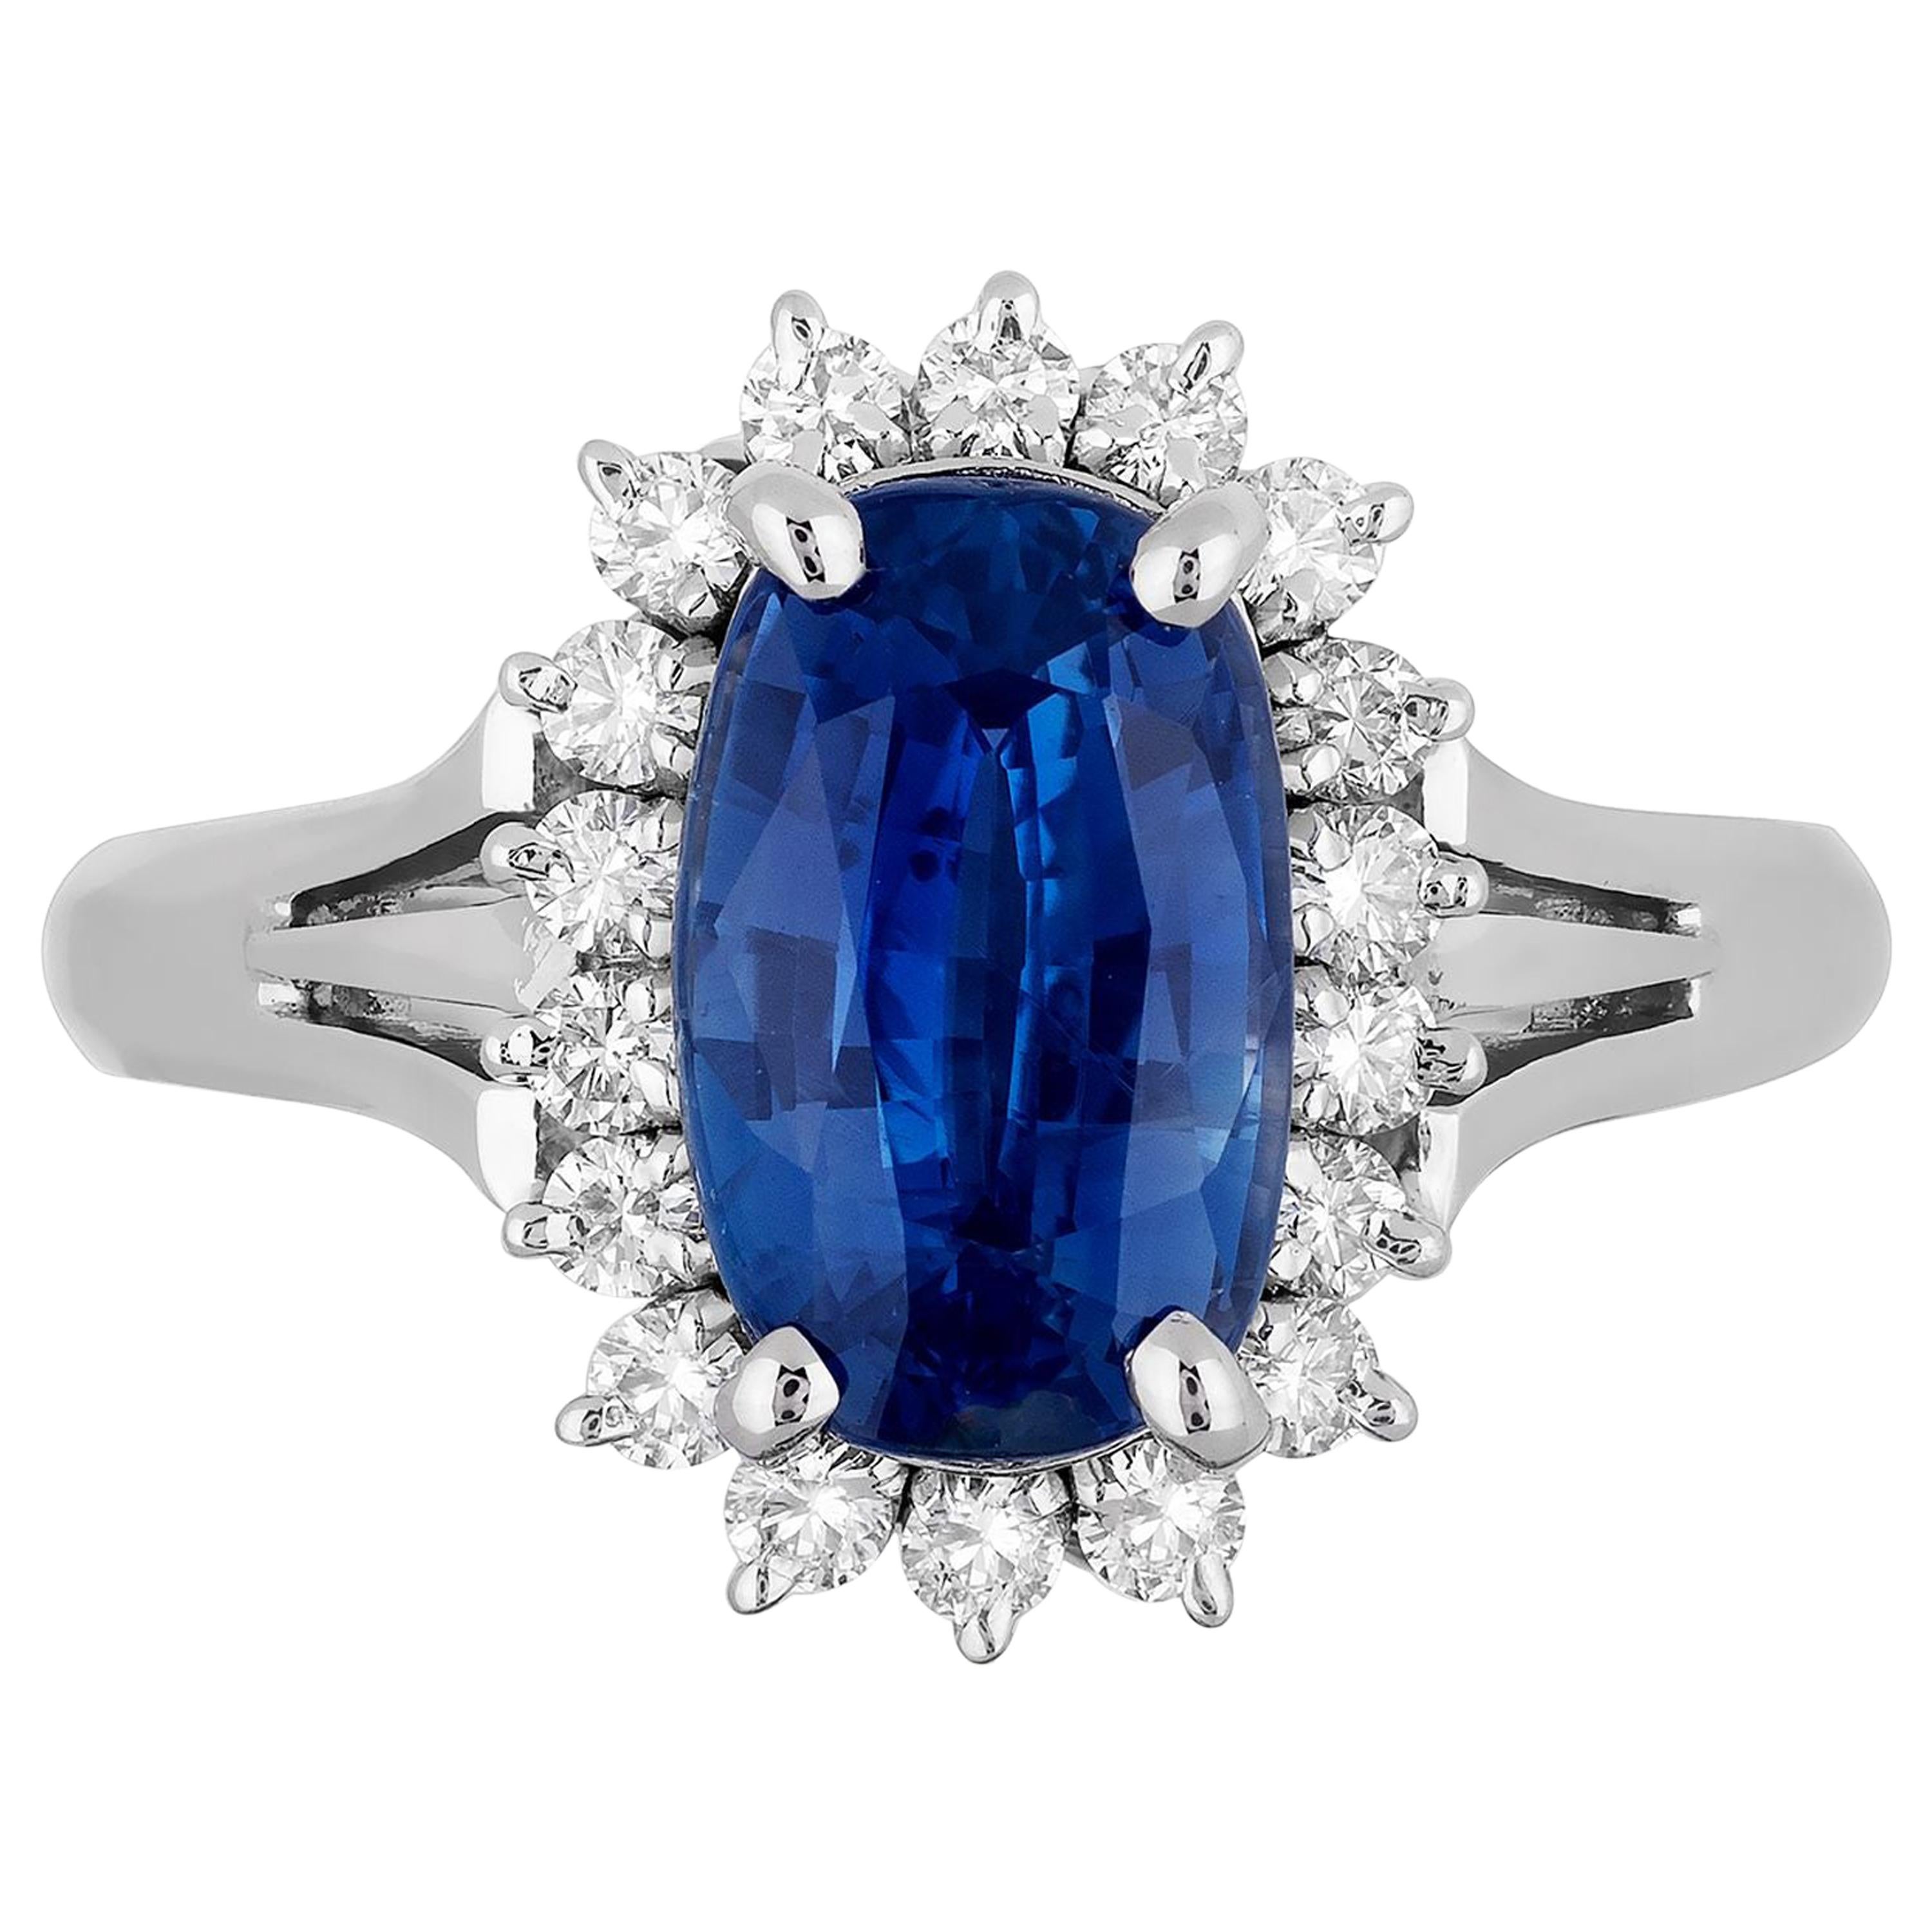 GIA Certified 2.83 Carat Natural No Heat Cushion Sapphire Diamond Cocktail Ring For Sale